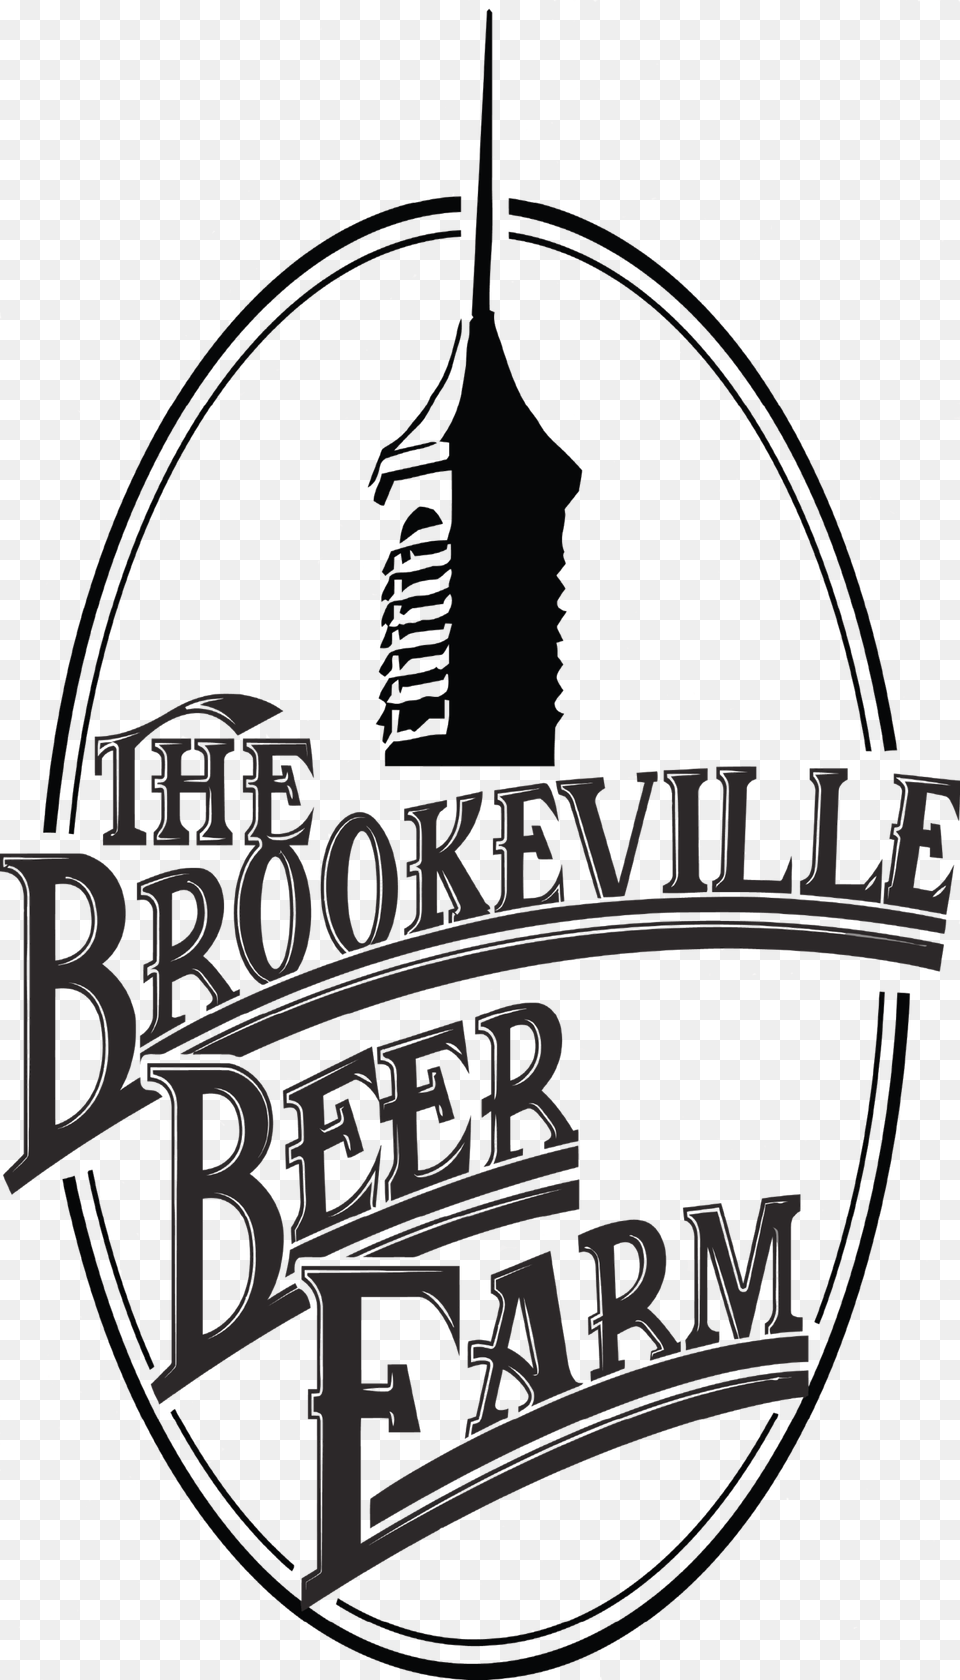 Brookeville Beer Farm Tap Takeover Clipart Download Brookeville Beer Farm Brewing, Logo, Architecture, Building, Factory Png